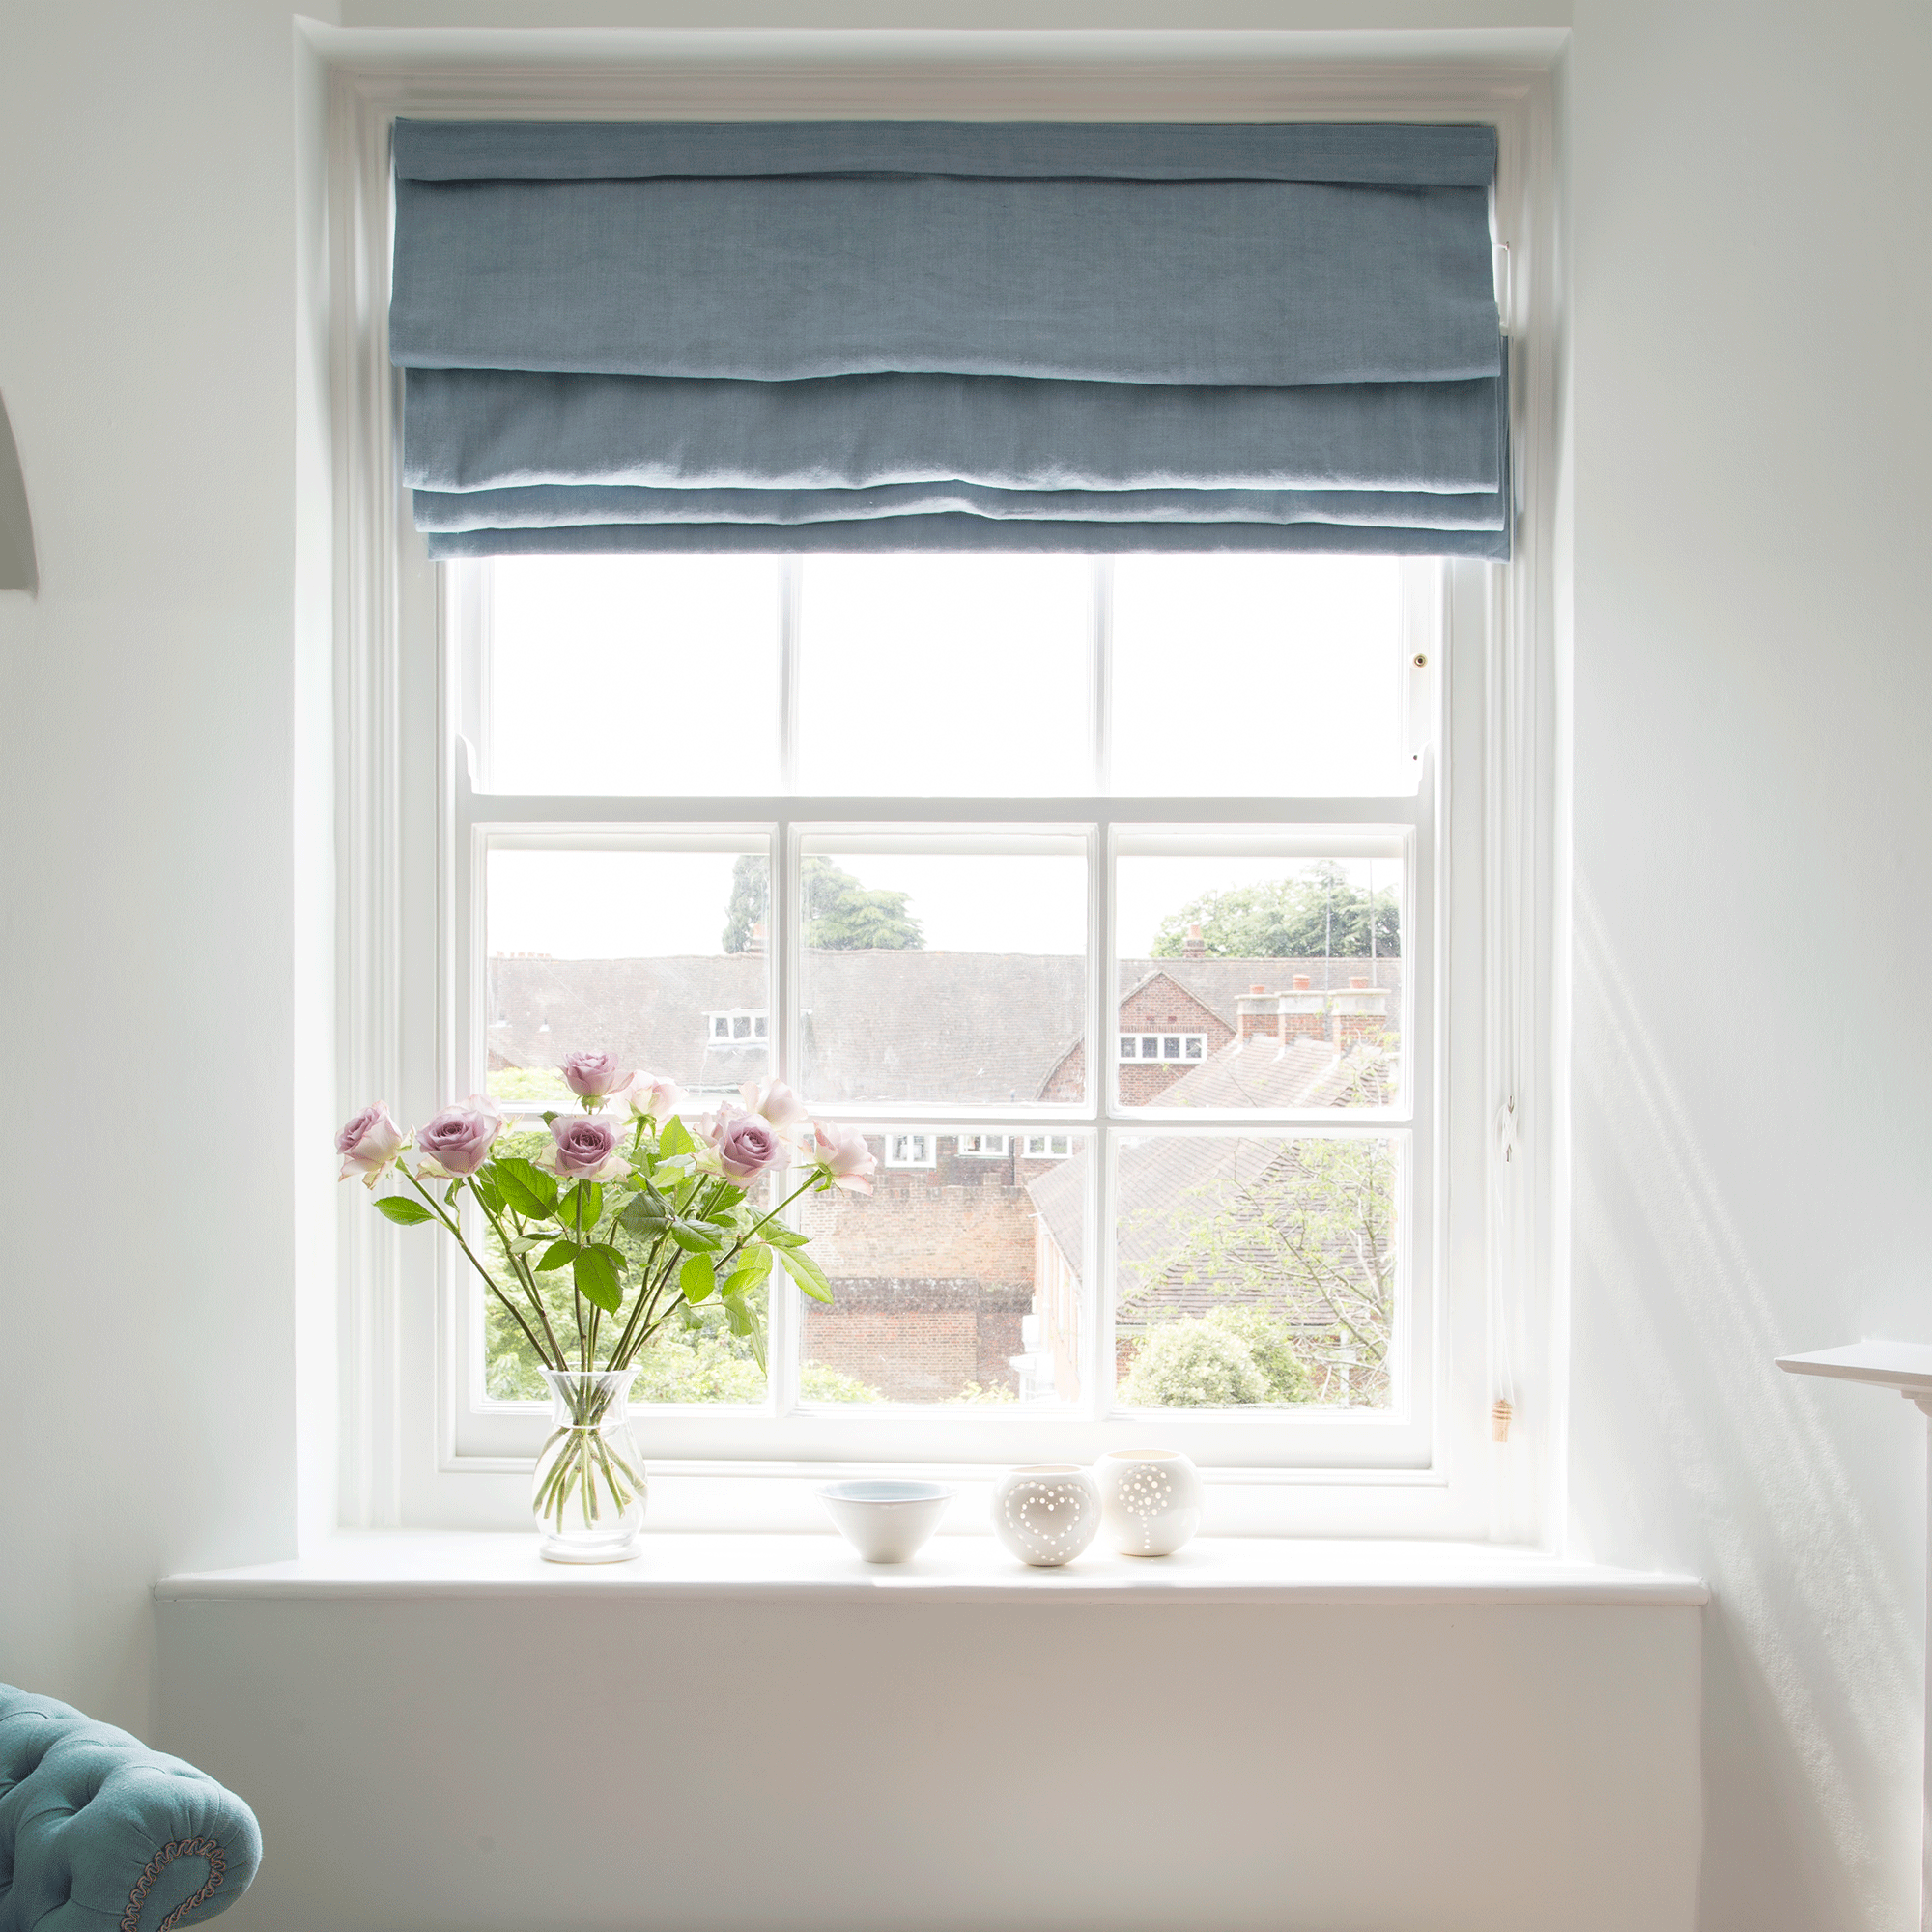 Window with blue blind